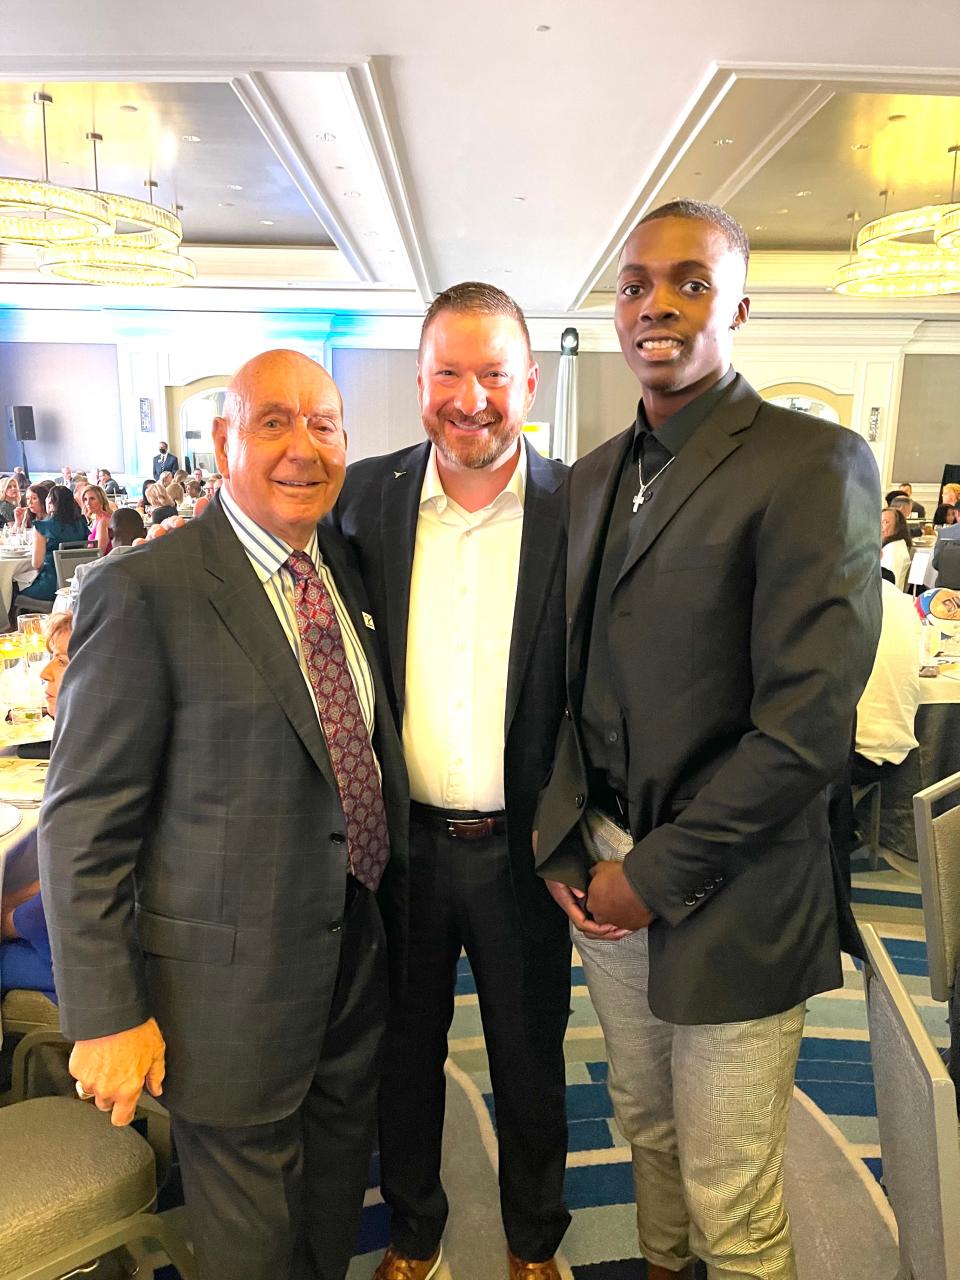 ESPN personality Dick Vitale, left, hosted Texas men's basketball coach Chris Beard and Longhorns guard Andrew Jones at his annual Dick Vitale Gala to benefit cancer research in May 2021. "He represents Texas in such a positive and classy way," Vitale said this week about Jones.